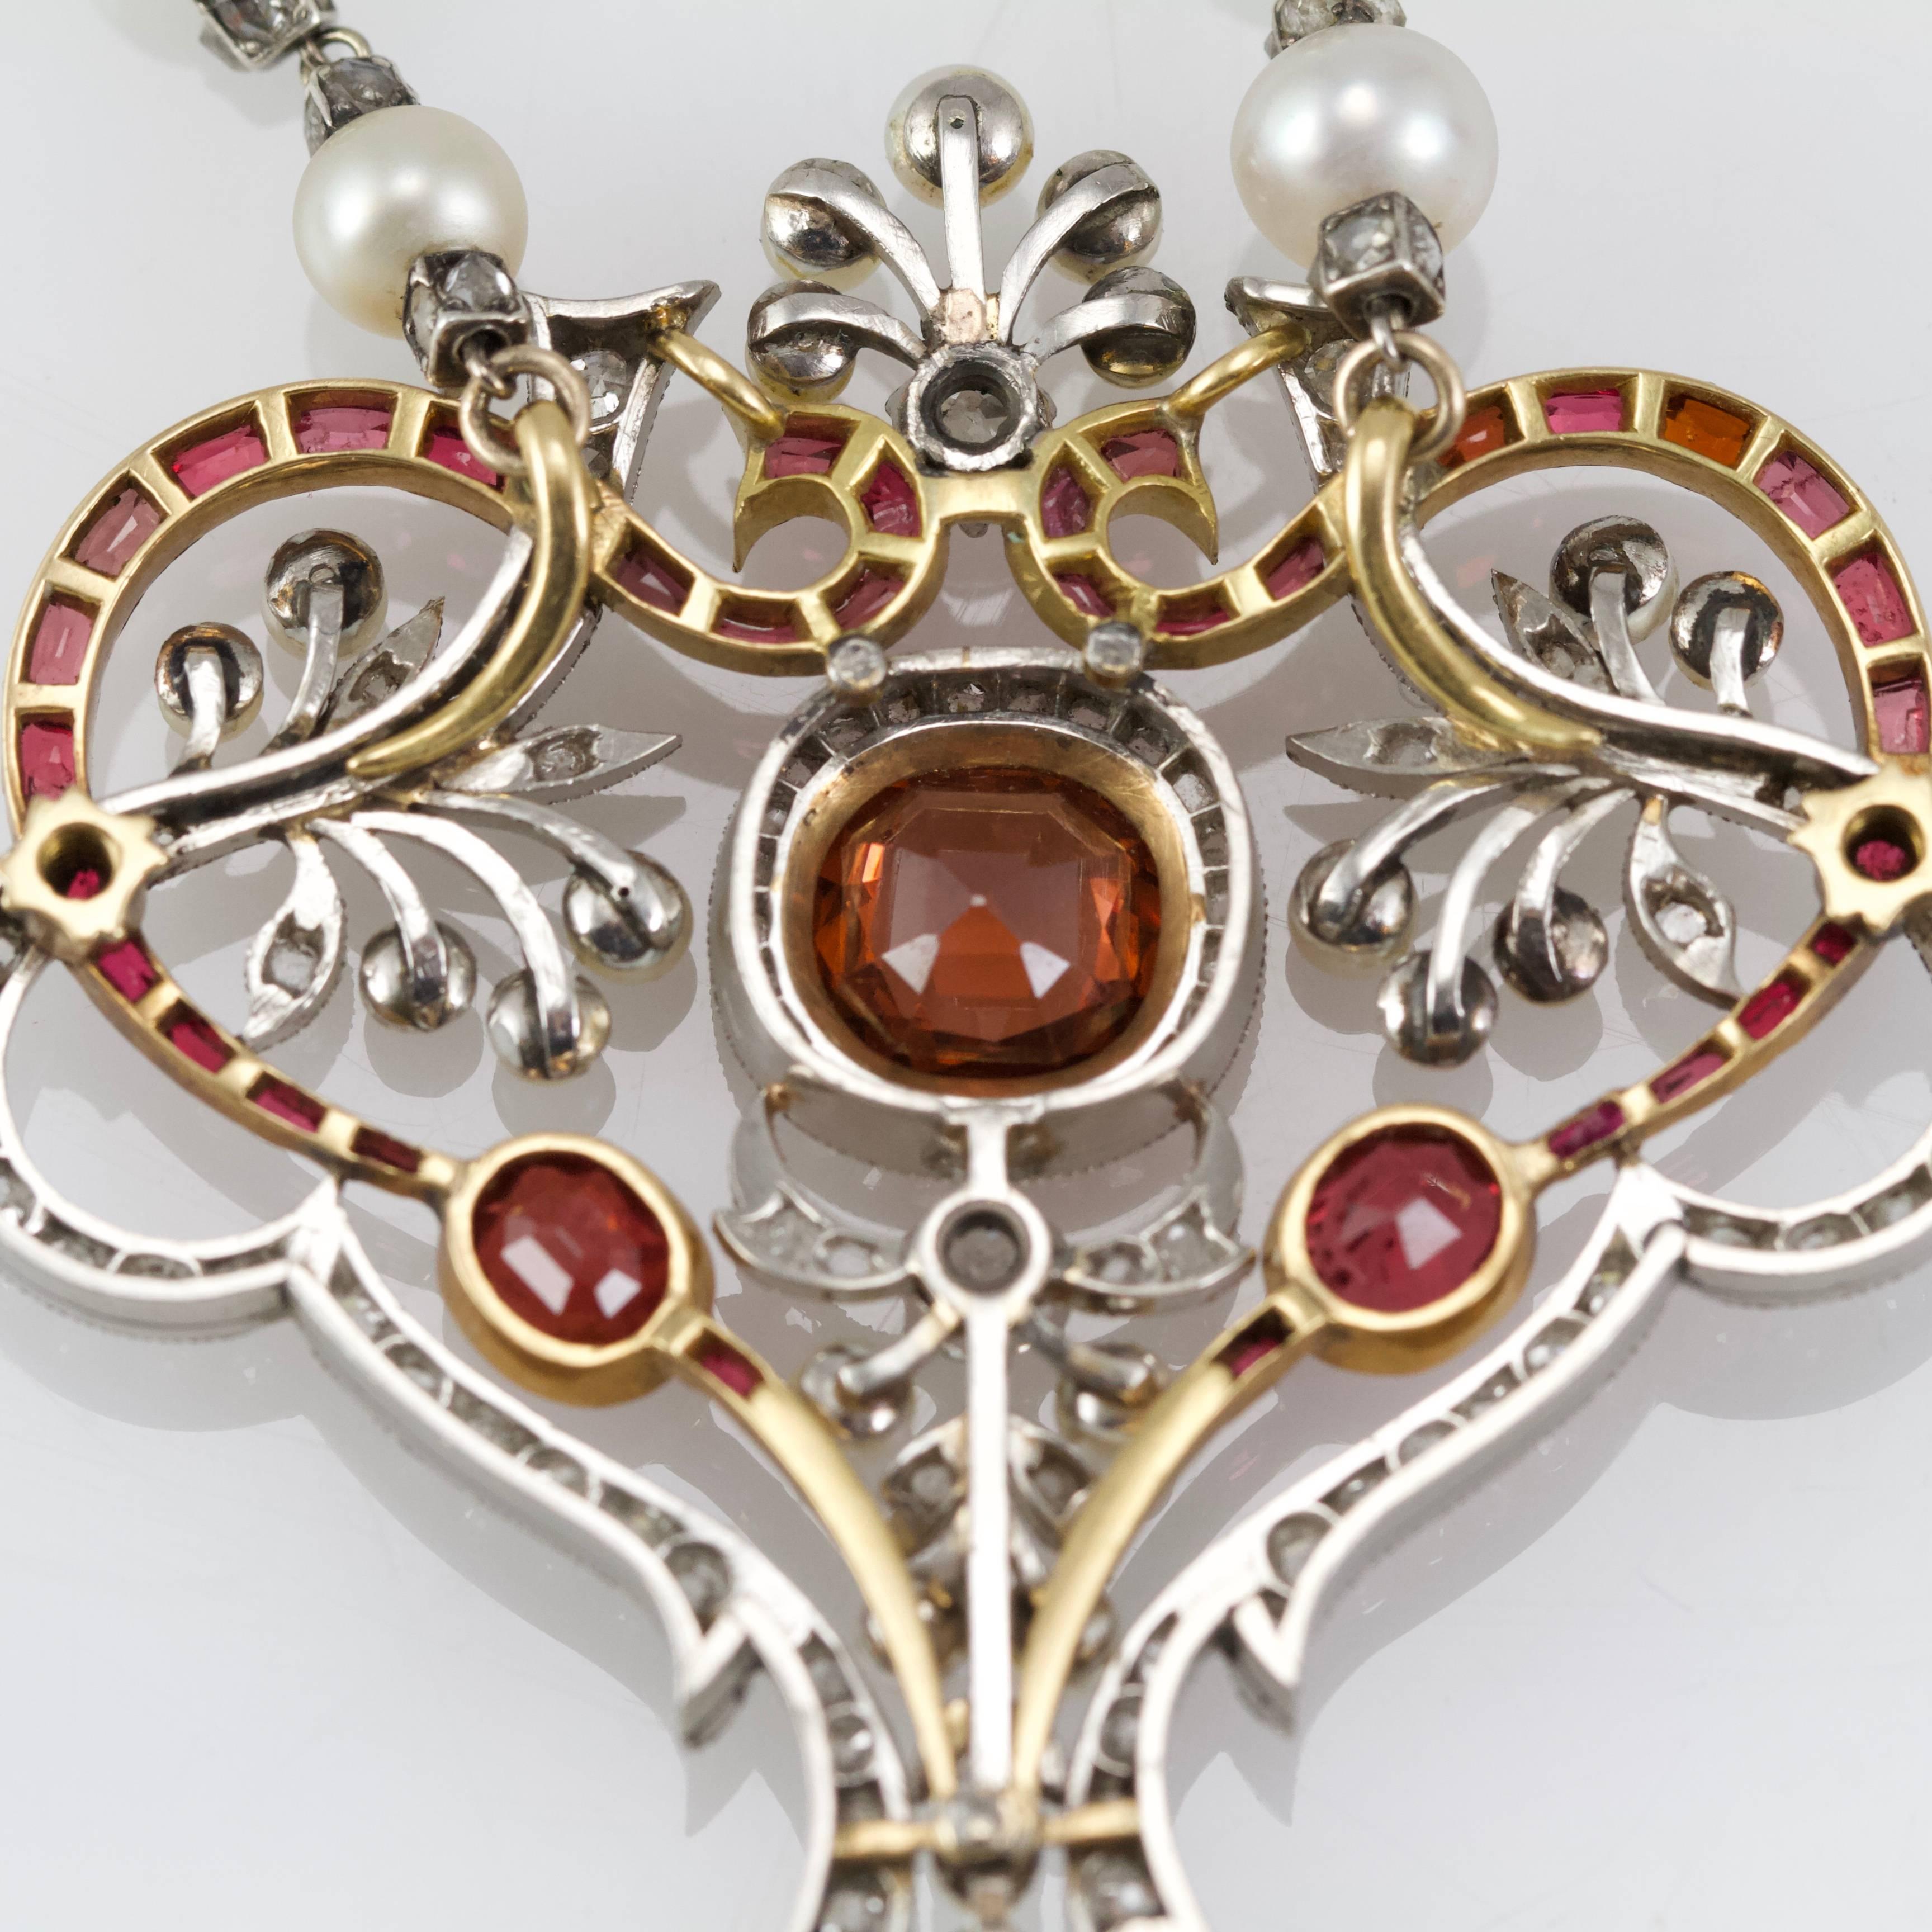 Women's or Men's Belle Epoque Diamond, Spinelle, Garnet and Pearls Necklace from Paris